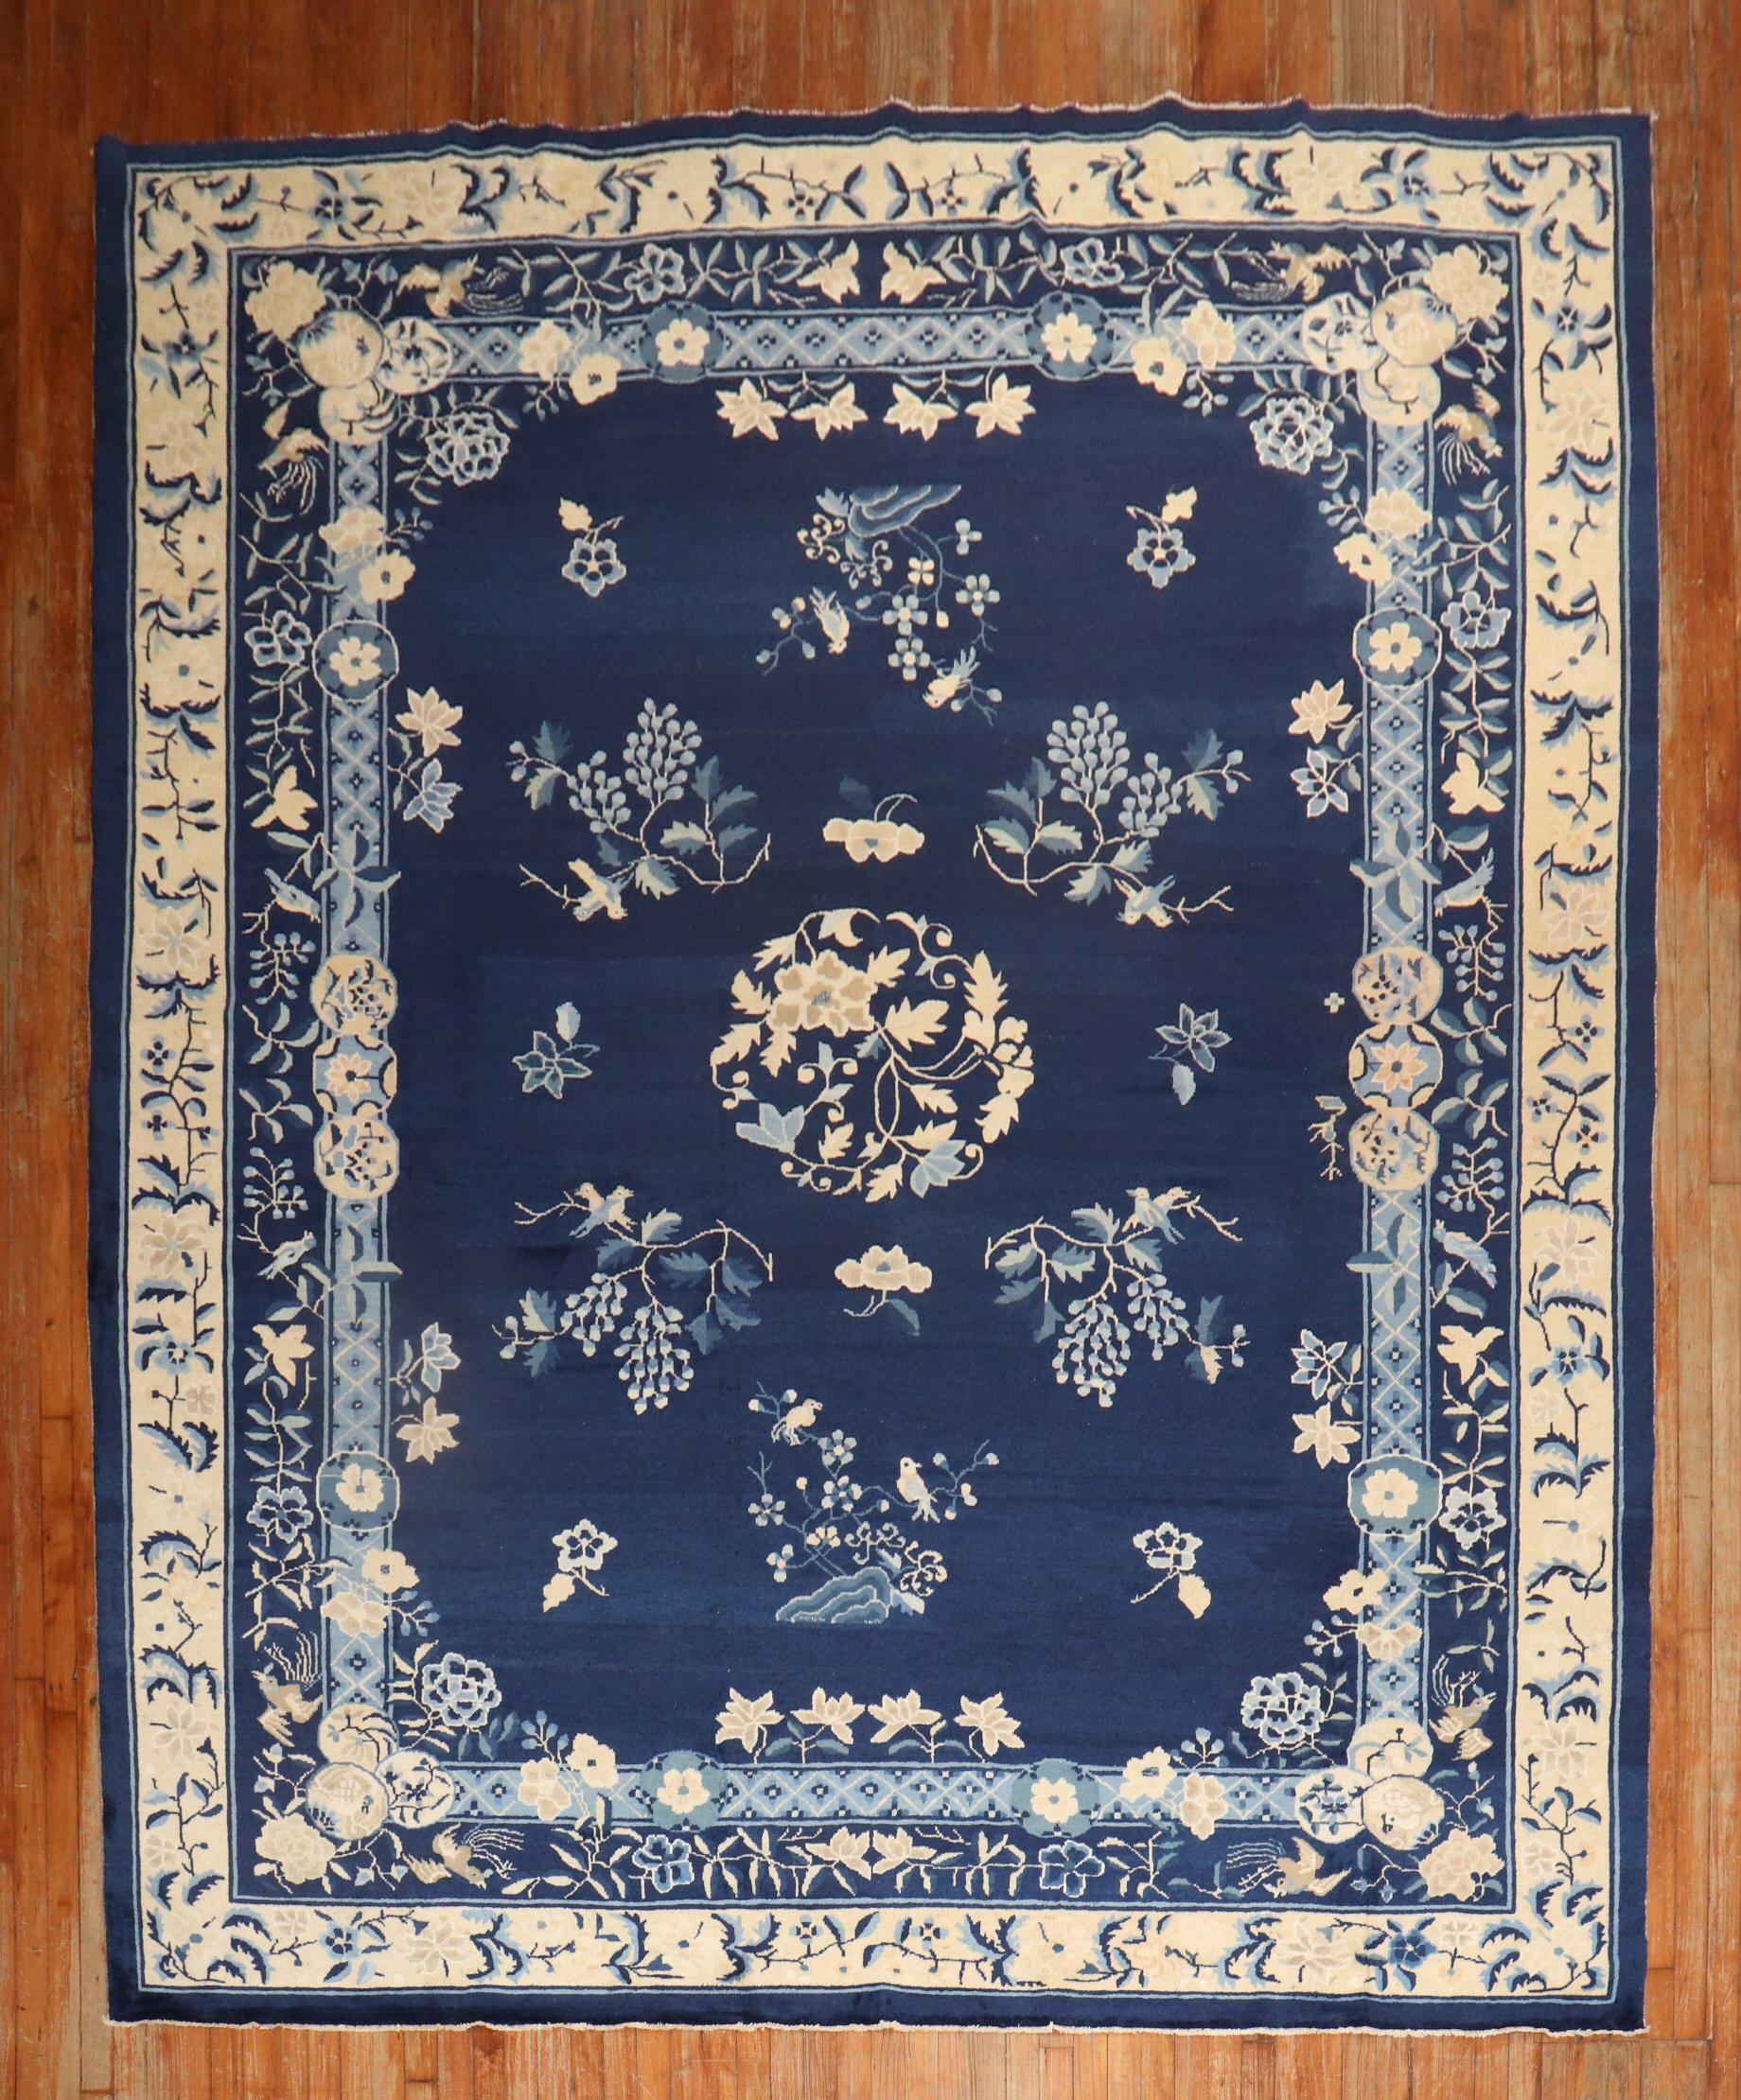 An authentic early-20th-century Chinese rug with a spacious open field floral design on a navy ground.

Measures: 8'11'' x 11'6''.